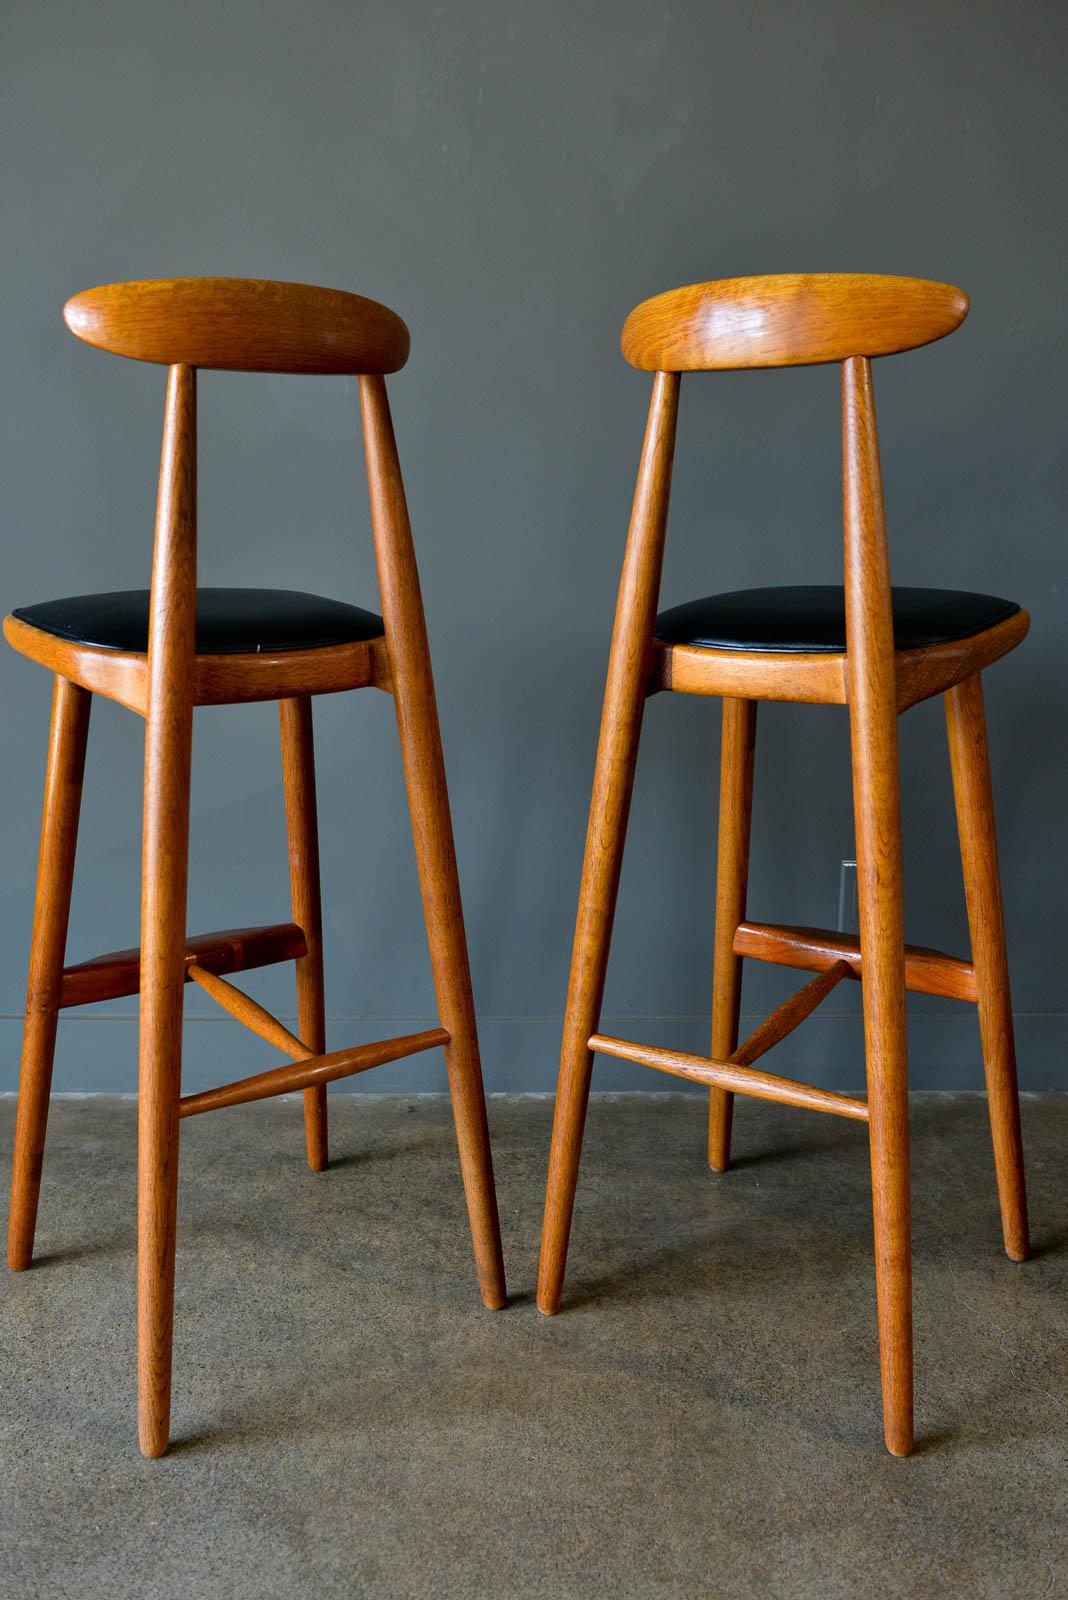 Vilhem Wohlert pair of teak barstools, circa 1960. Matching pair with sculpted oak frame and old growth teak footrest with original black vinyl seats in good condition with only slight wear. Solid wood, no veneer. Totally original and unrestored,